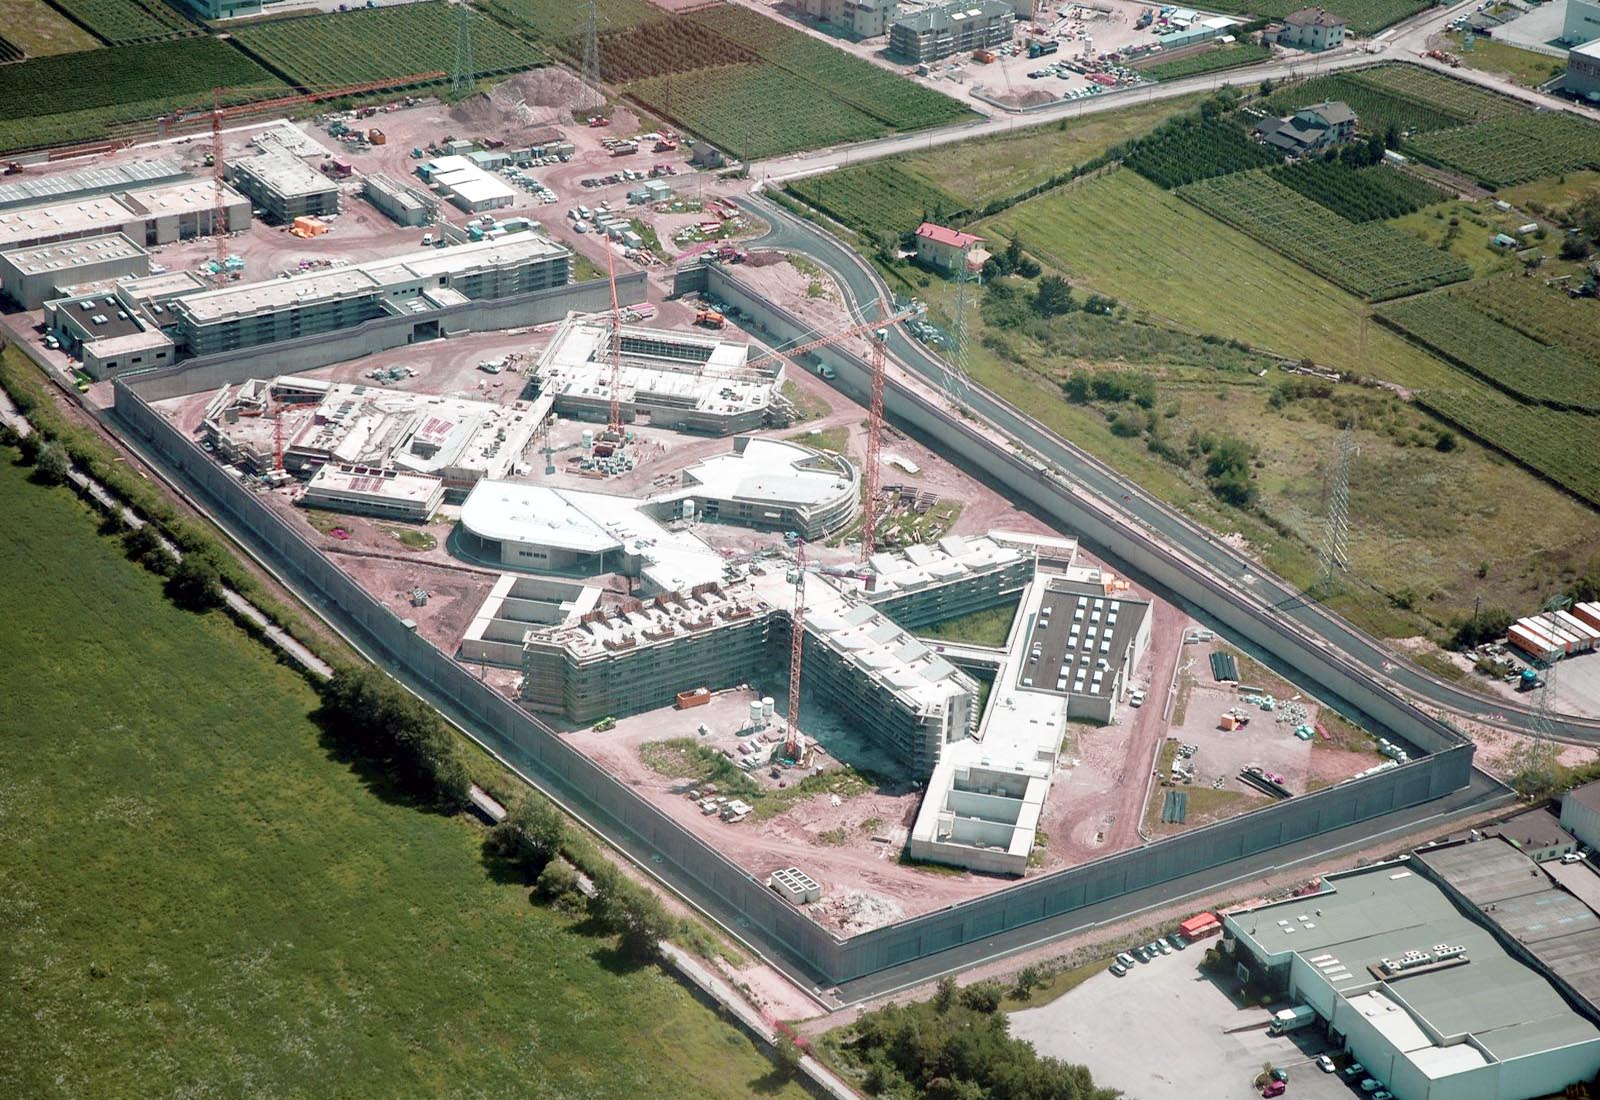 Prison building of Trento - Aerial view